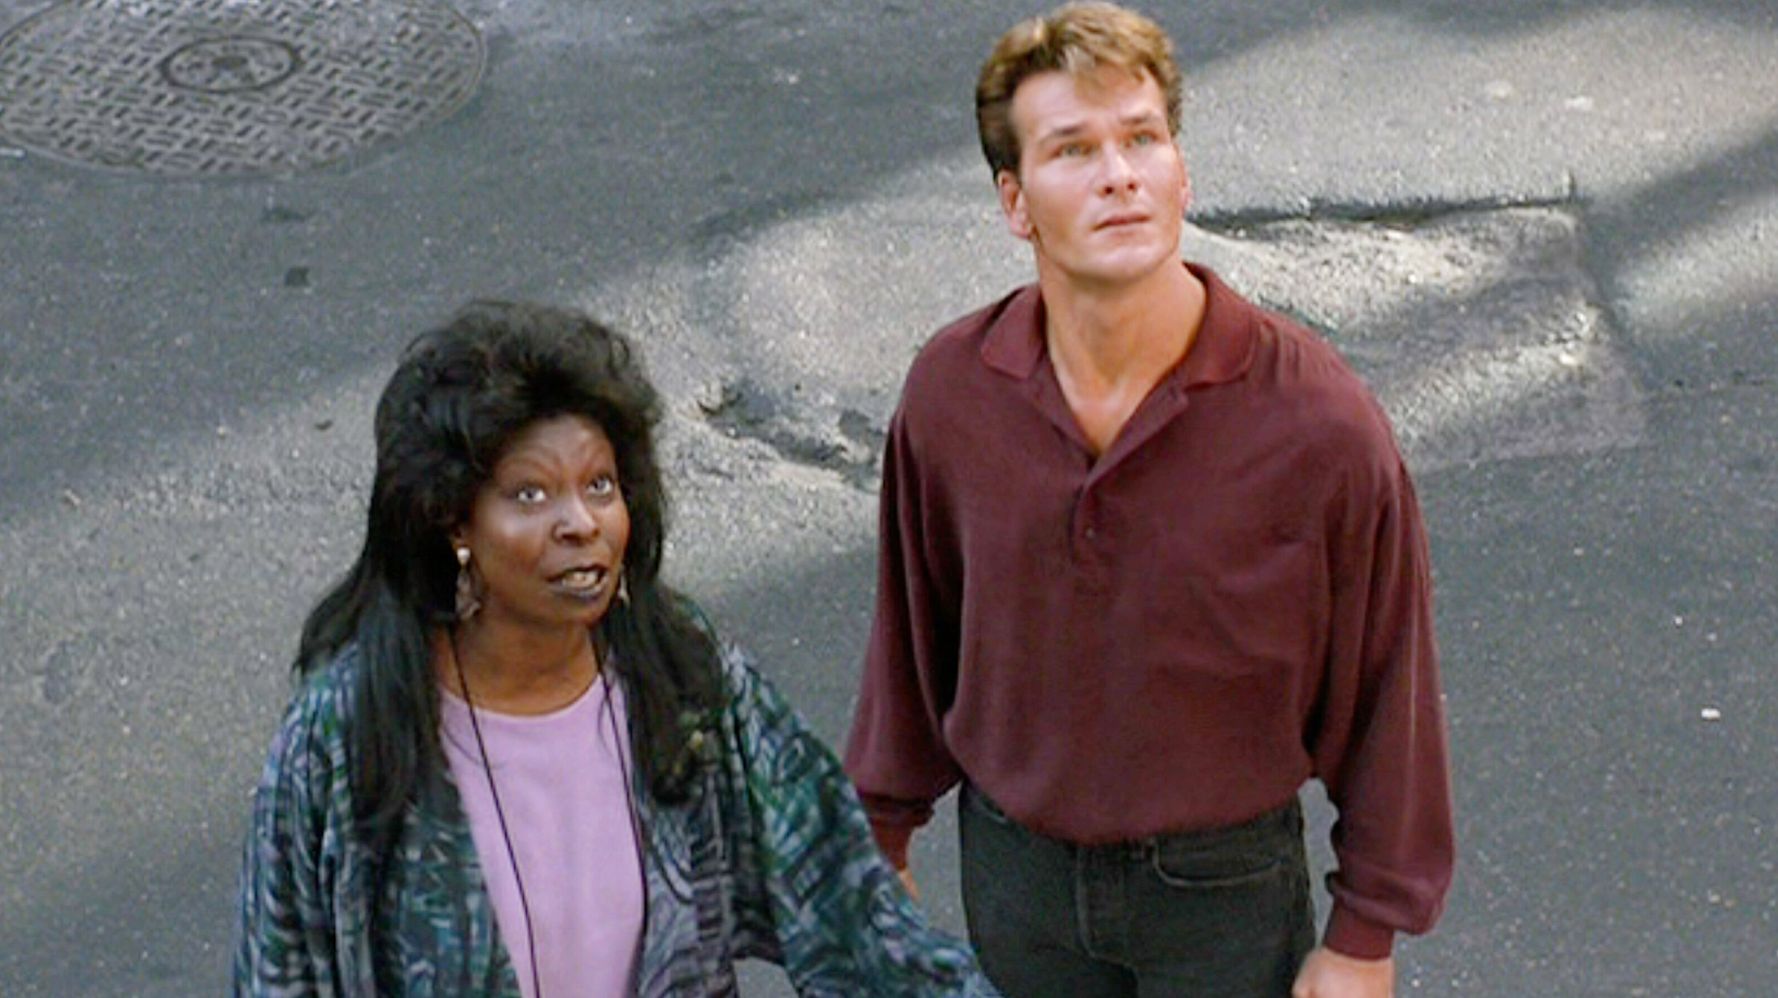 Whoopi Goldberg reveals Patrick Swayze fought for her to get an iconic ‘Ghost’ role